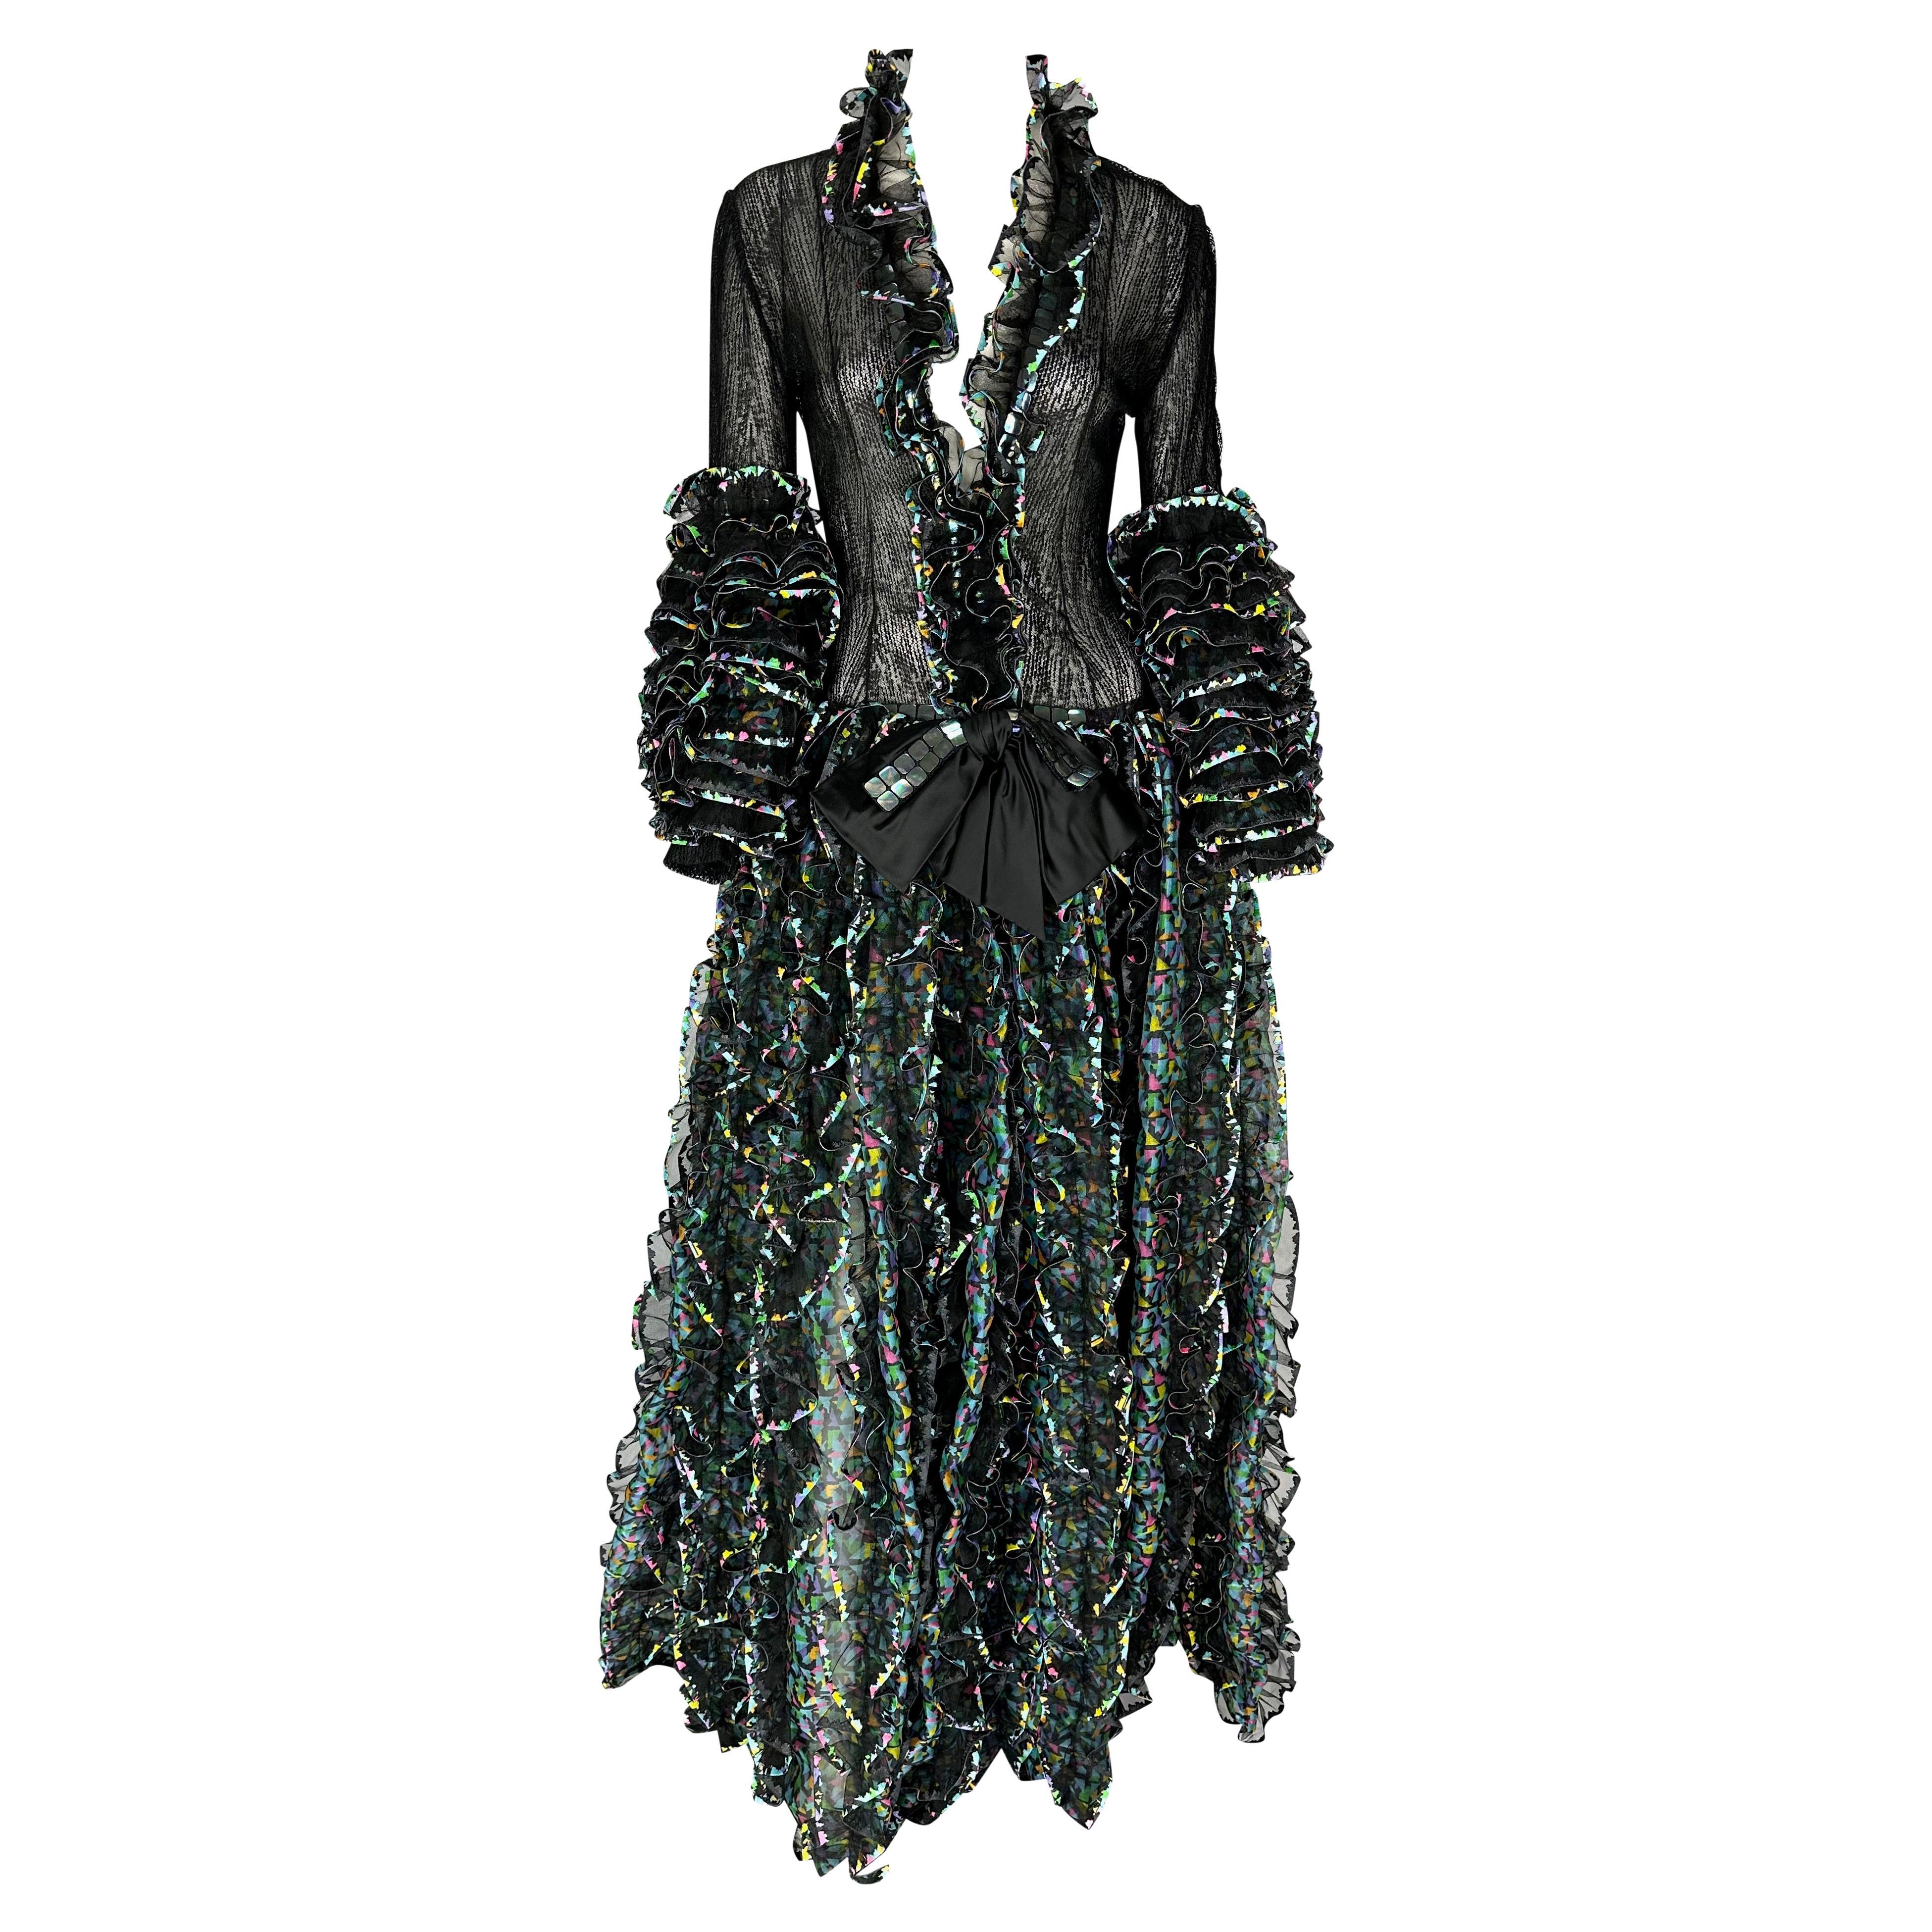 S/S 1987 Paco Rabanne Haute Couture Runway Sheer Embroidered Ruffle Gown For Sale